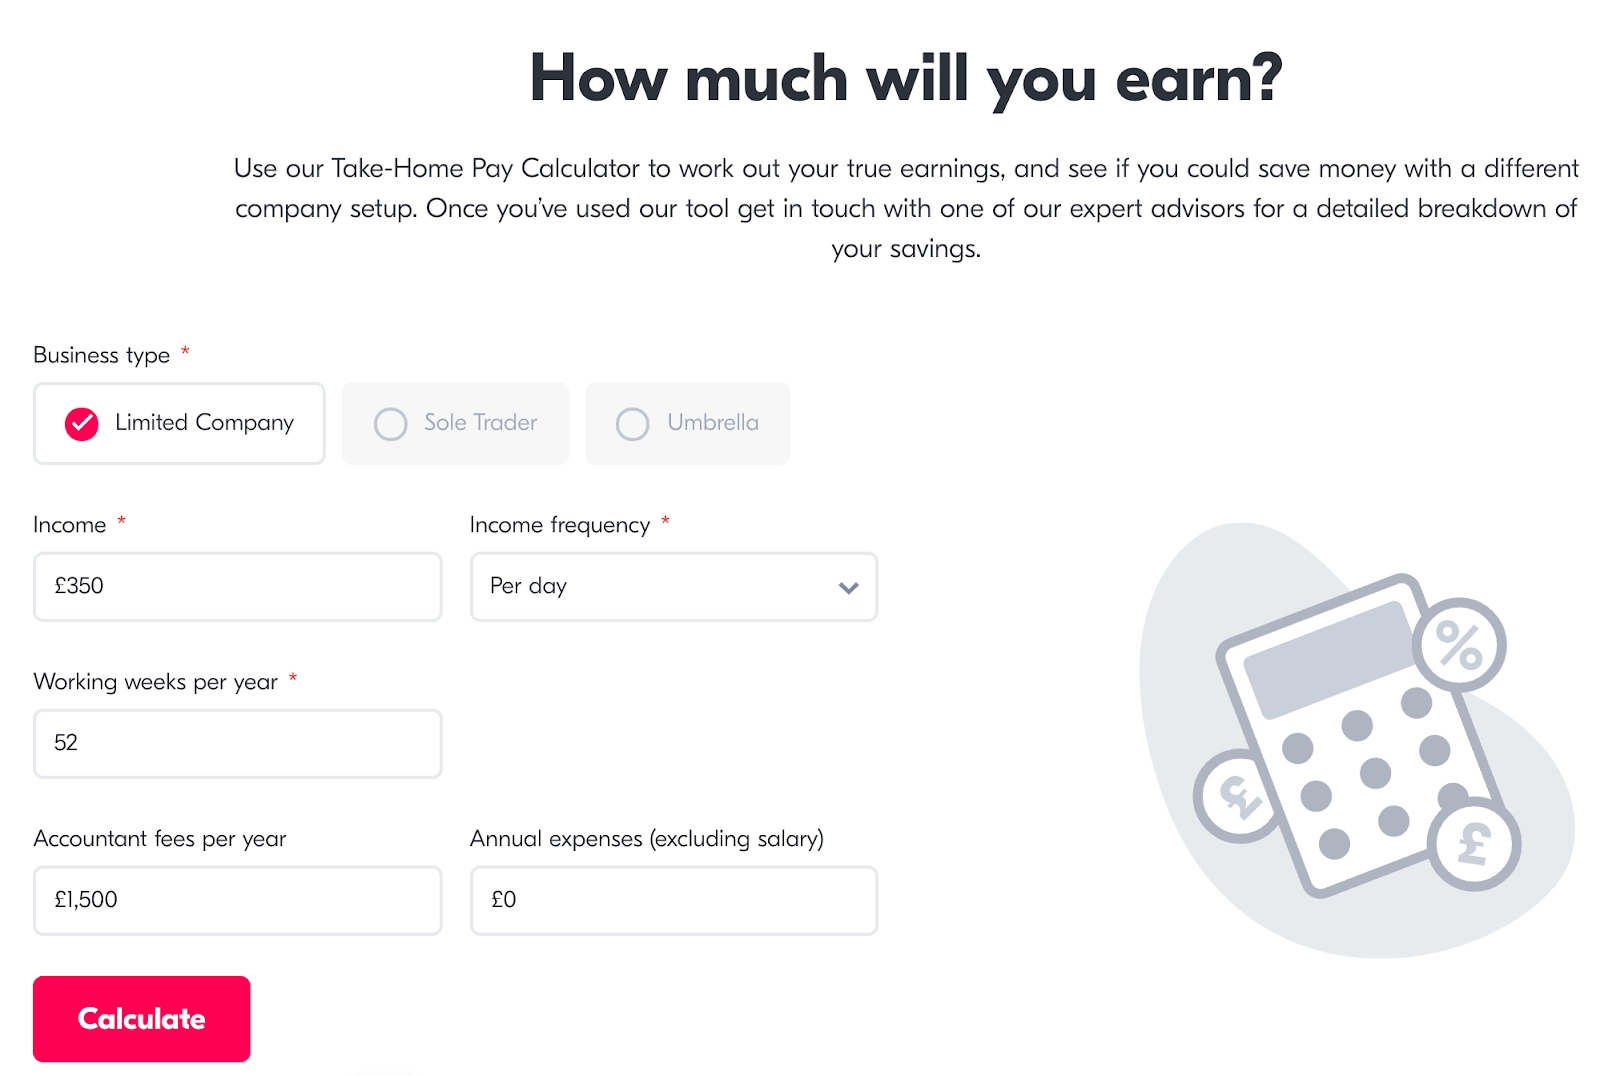 Crunch's free take-home-pay calculator